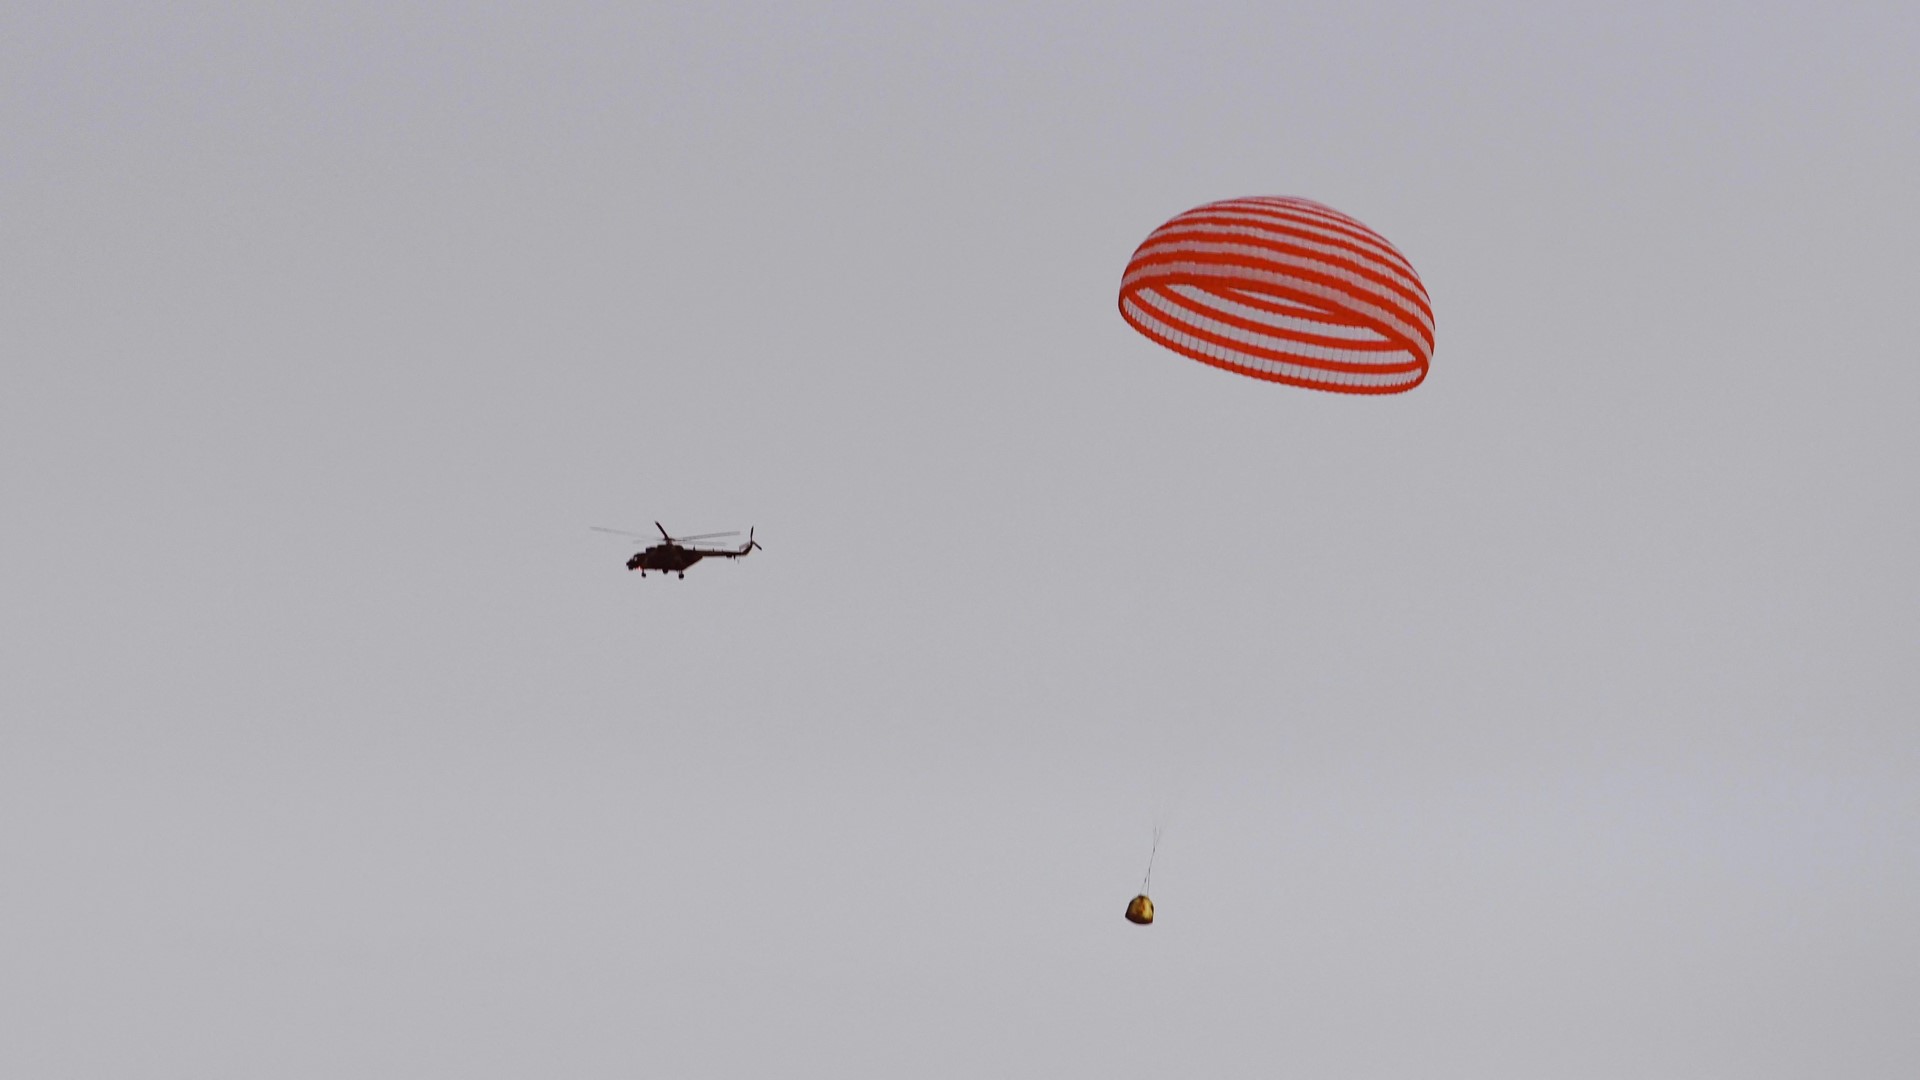 Chinese Shenzhou 15 space capsule descending under parachute with recovery helicopter in background